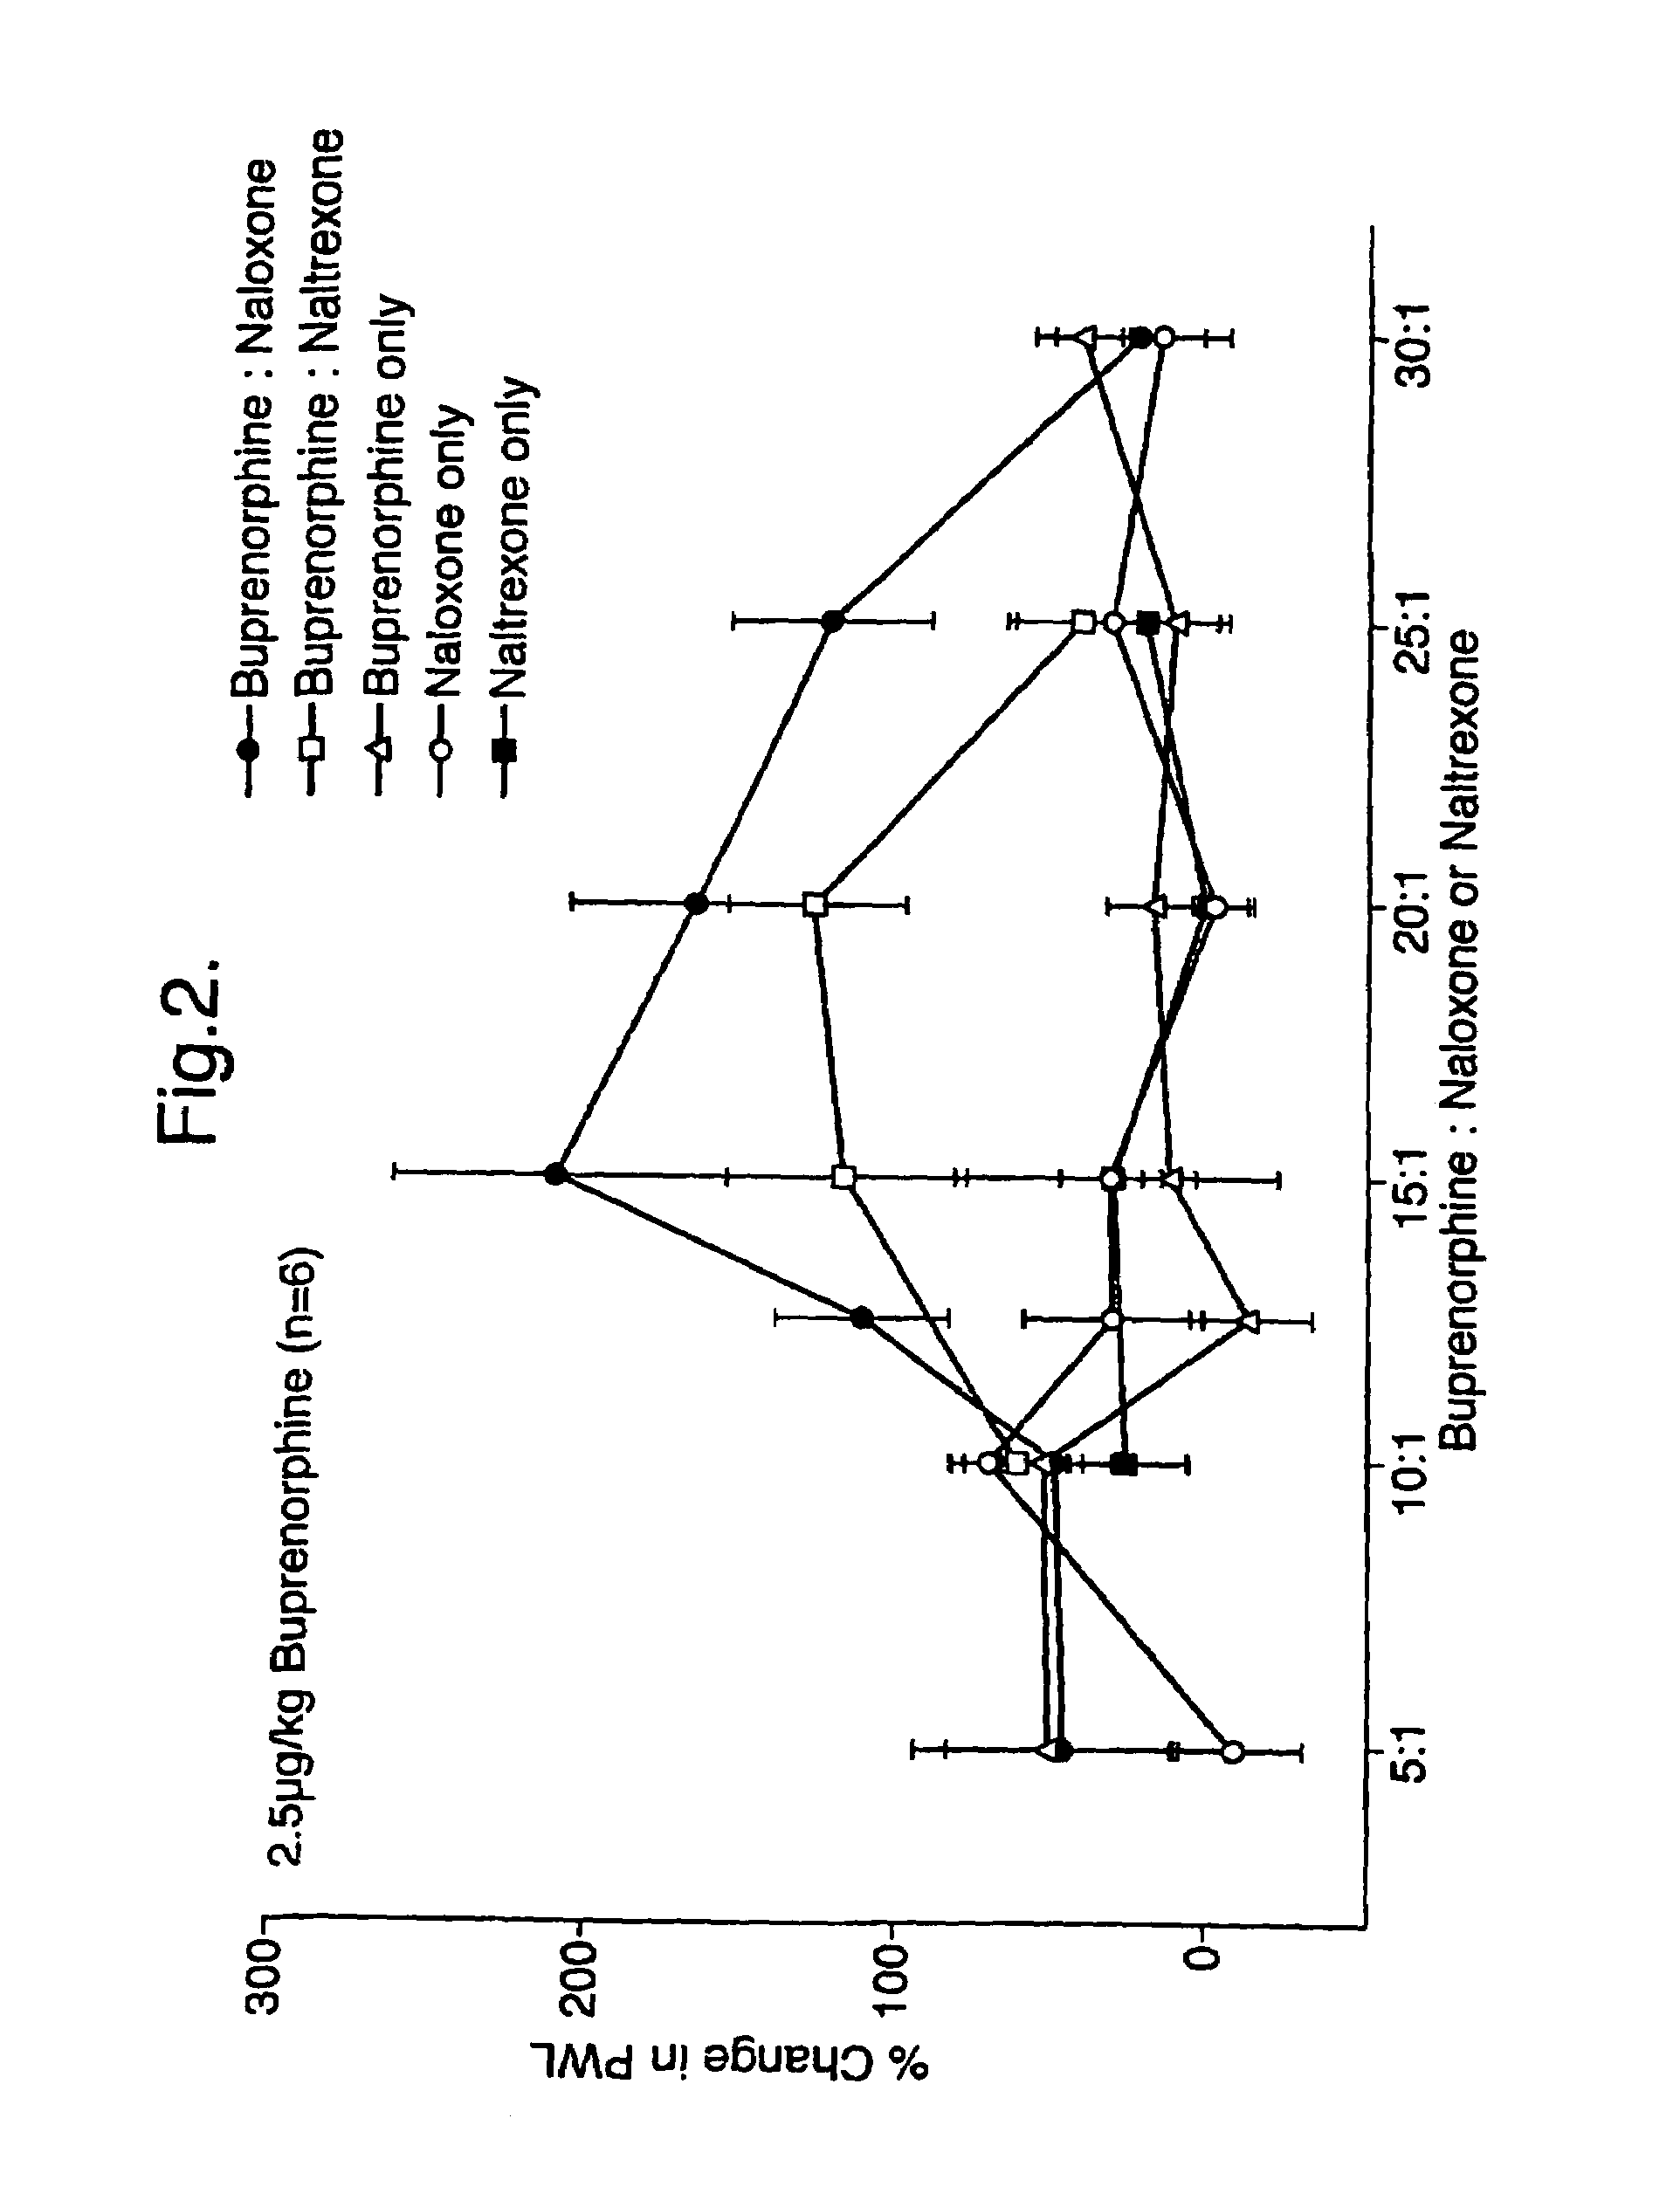 Analgesic compositions containing buprenorphine